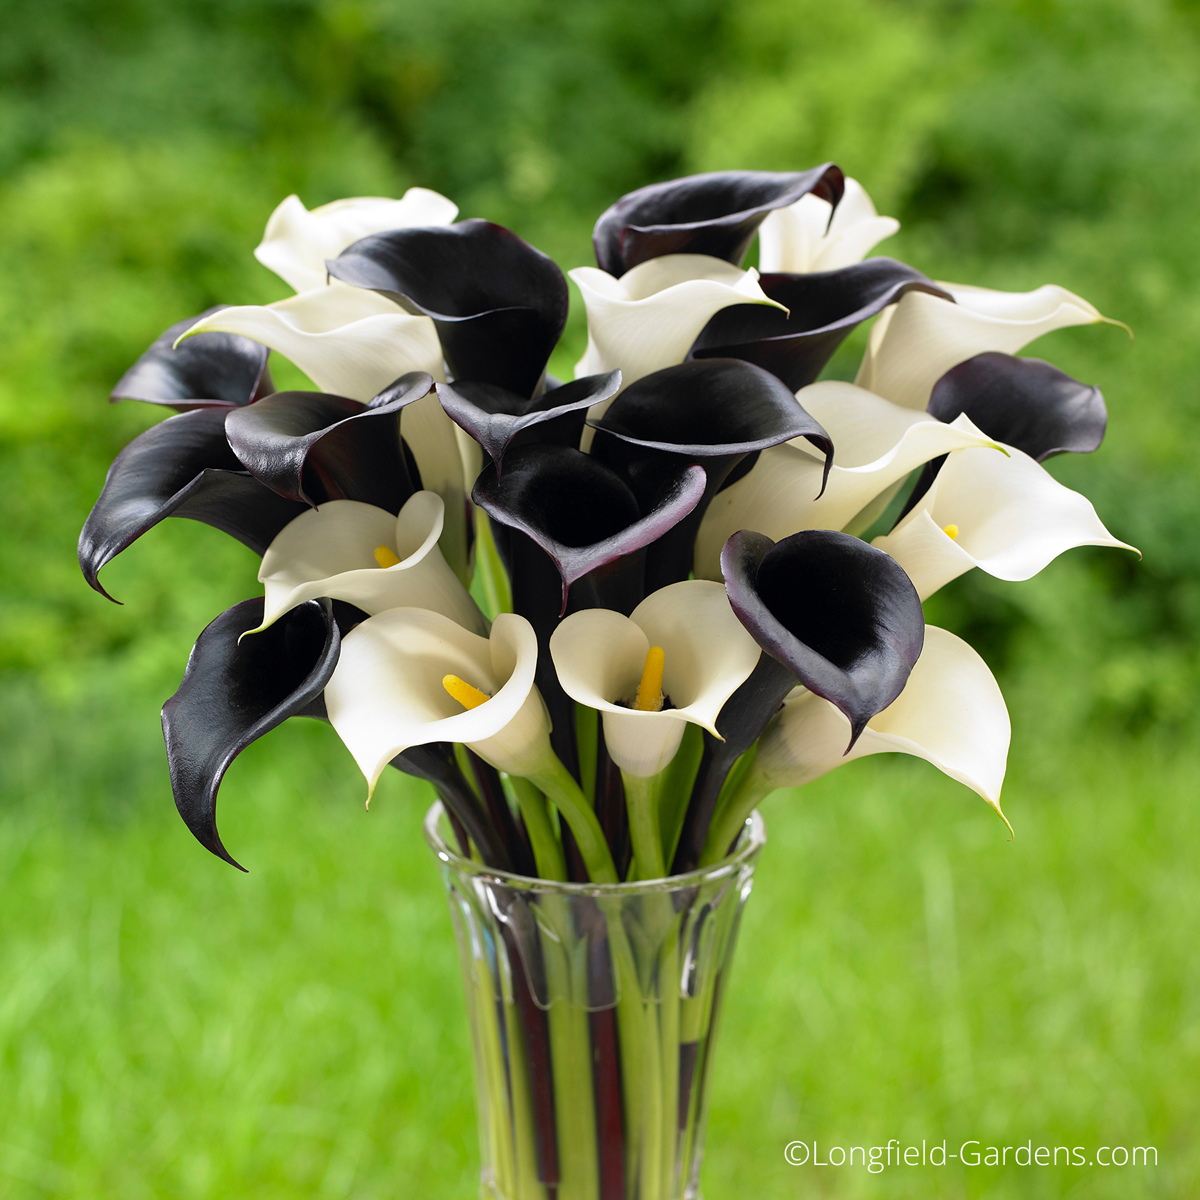 Calla lilies, like ‘Night Cap’ with its black flowers and the white blooms of ‘Crystal Clear,’ are spring planted bulbs that thrive in full sun or part shade and can be cut to create an elegant displa